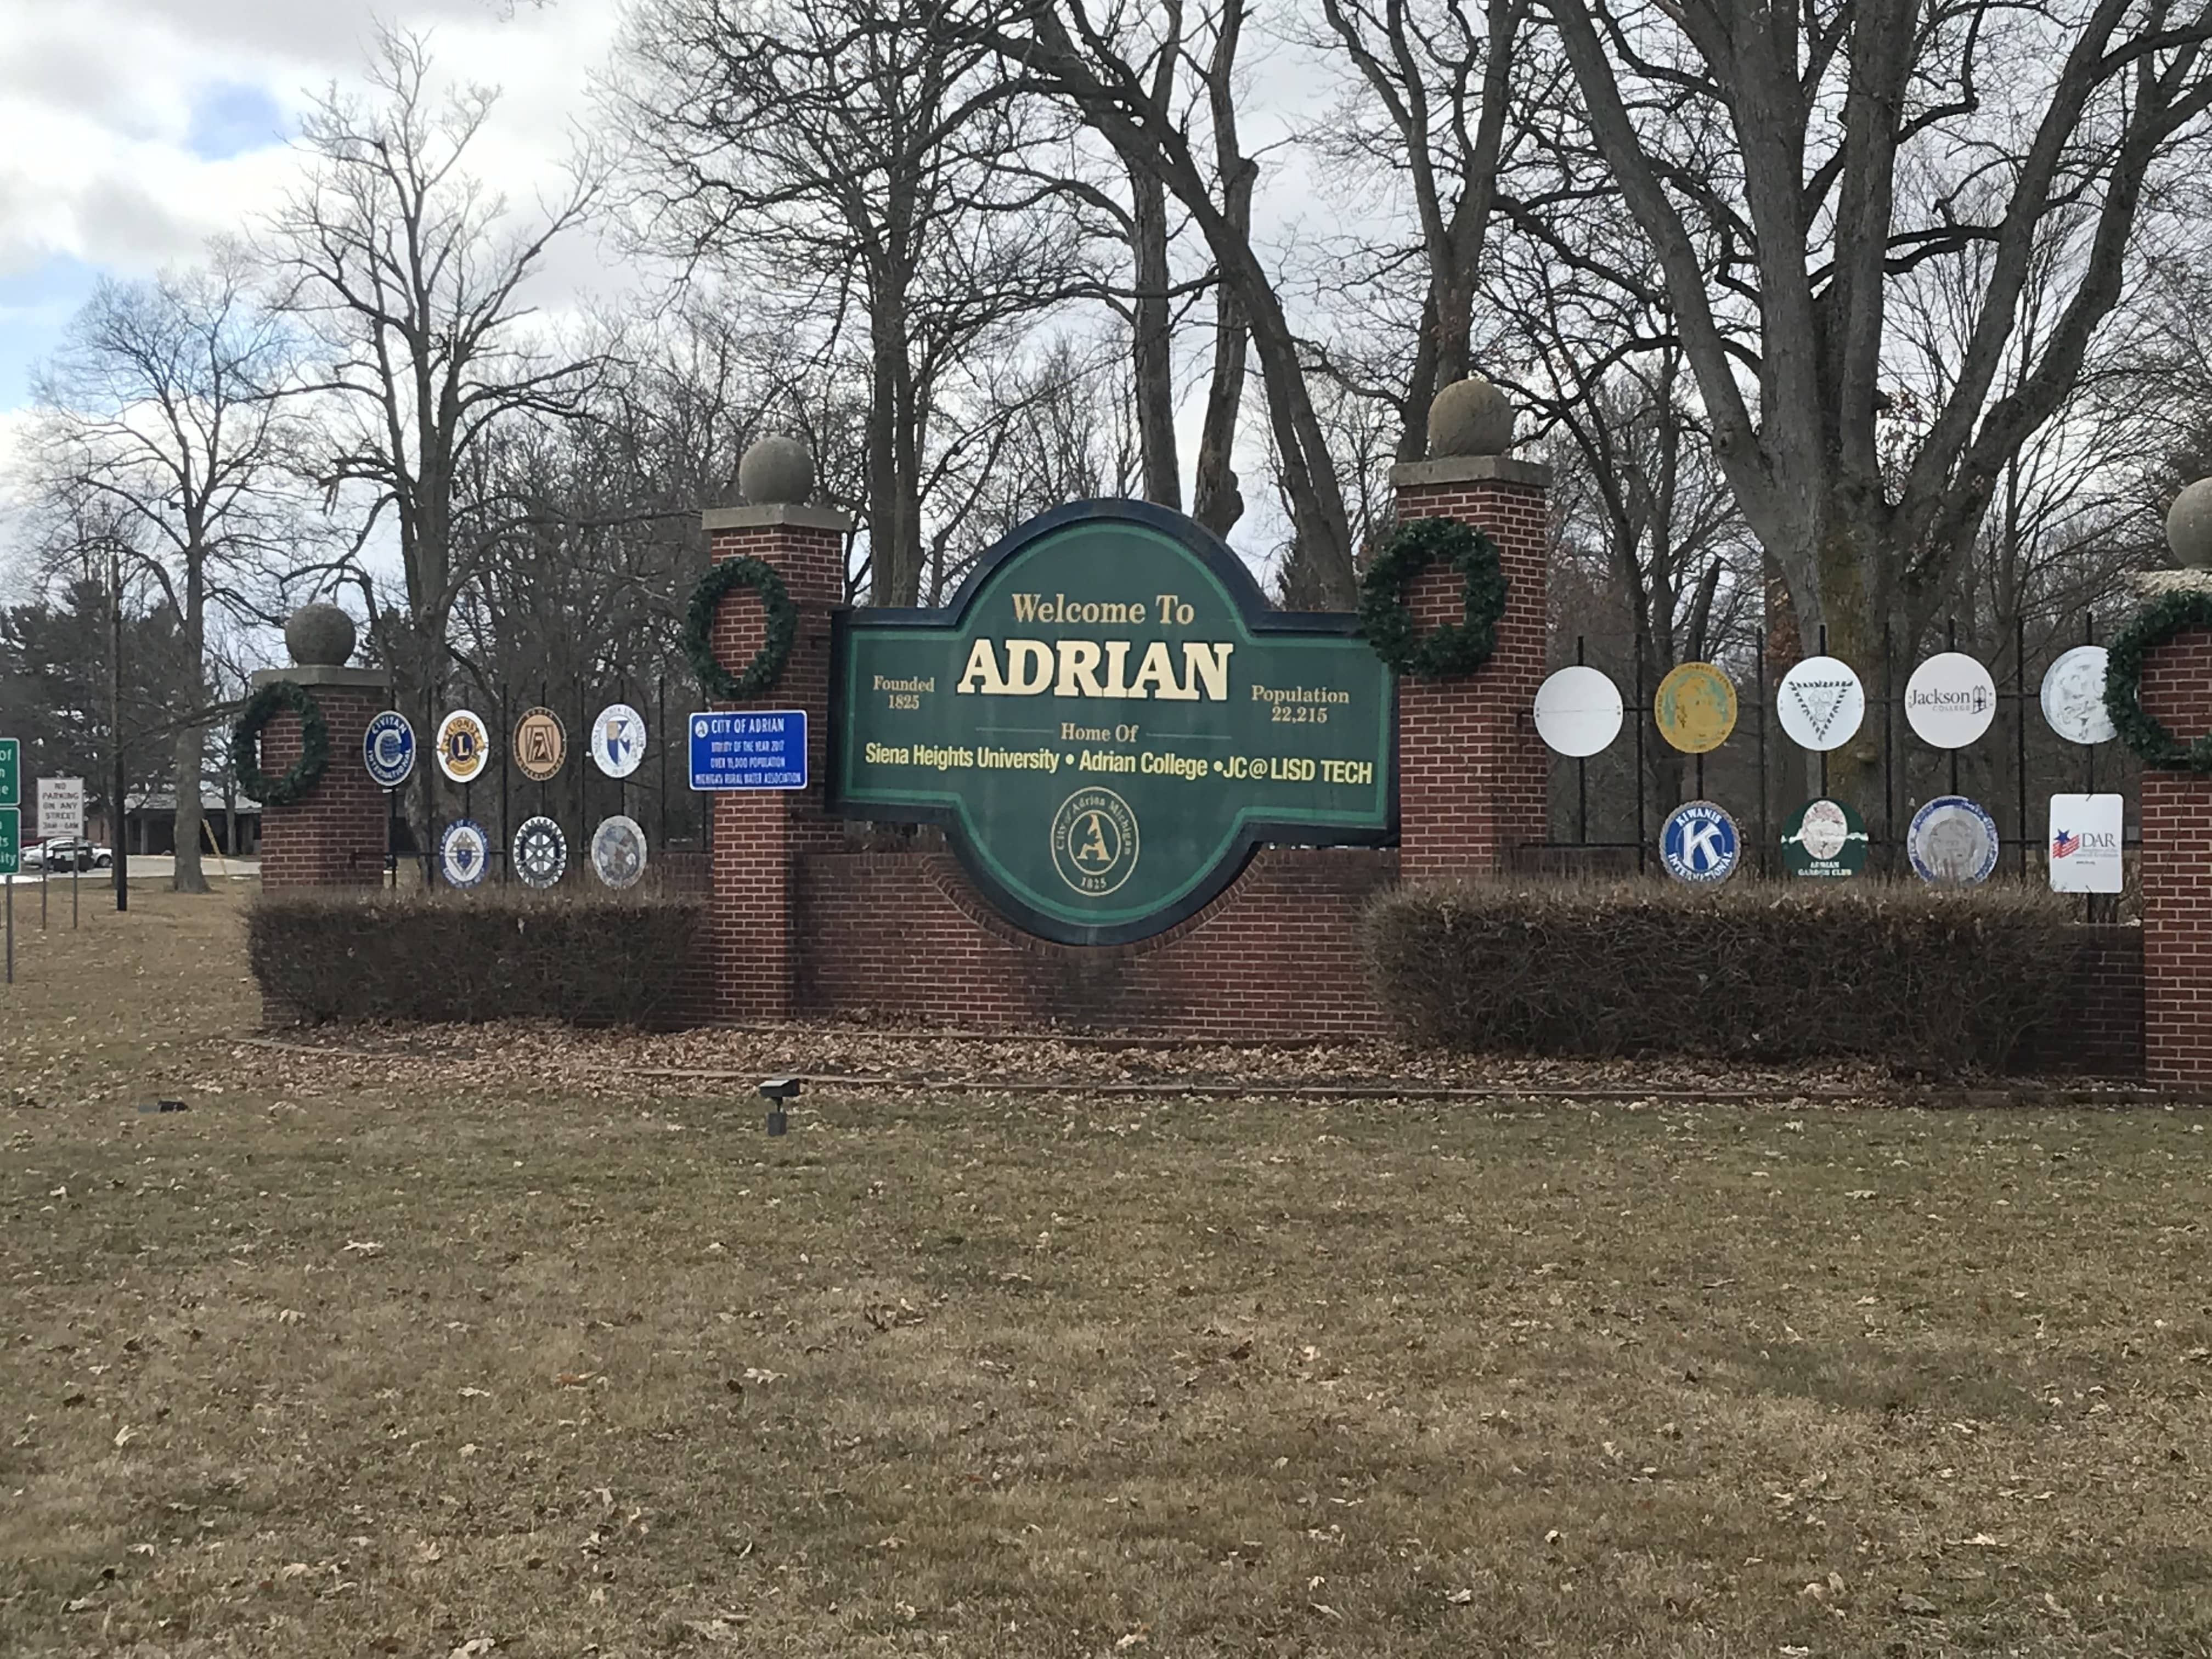 adrian-welcome-sign-3-4-21